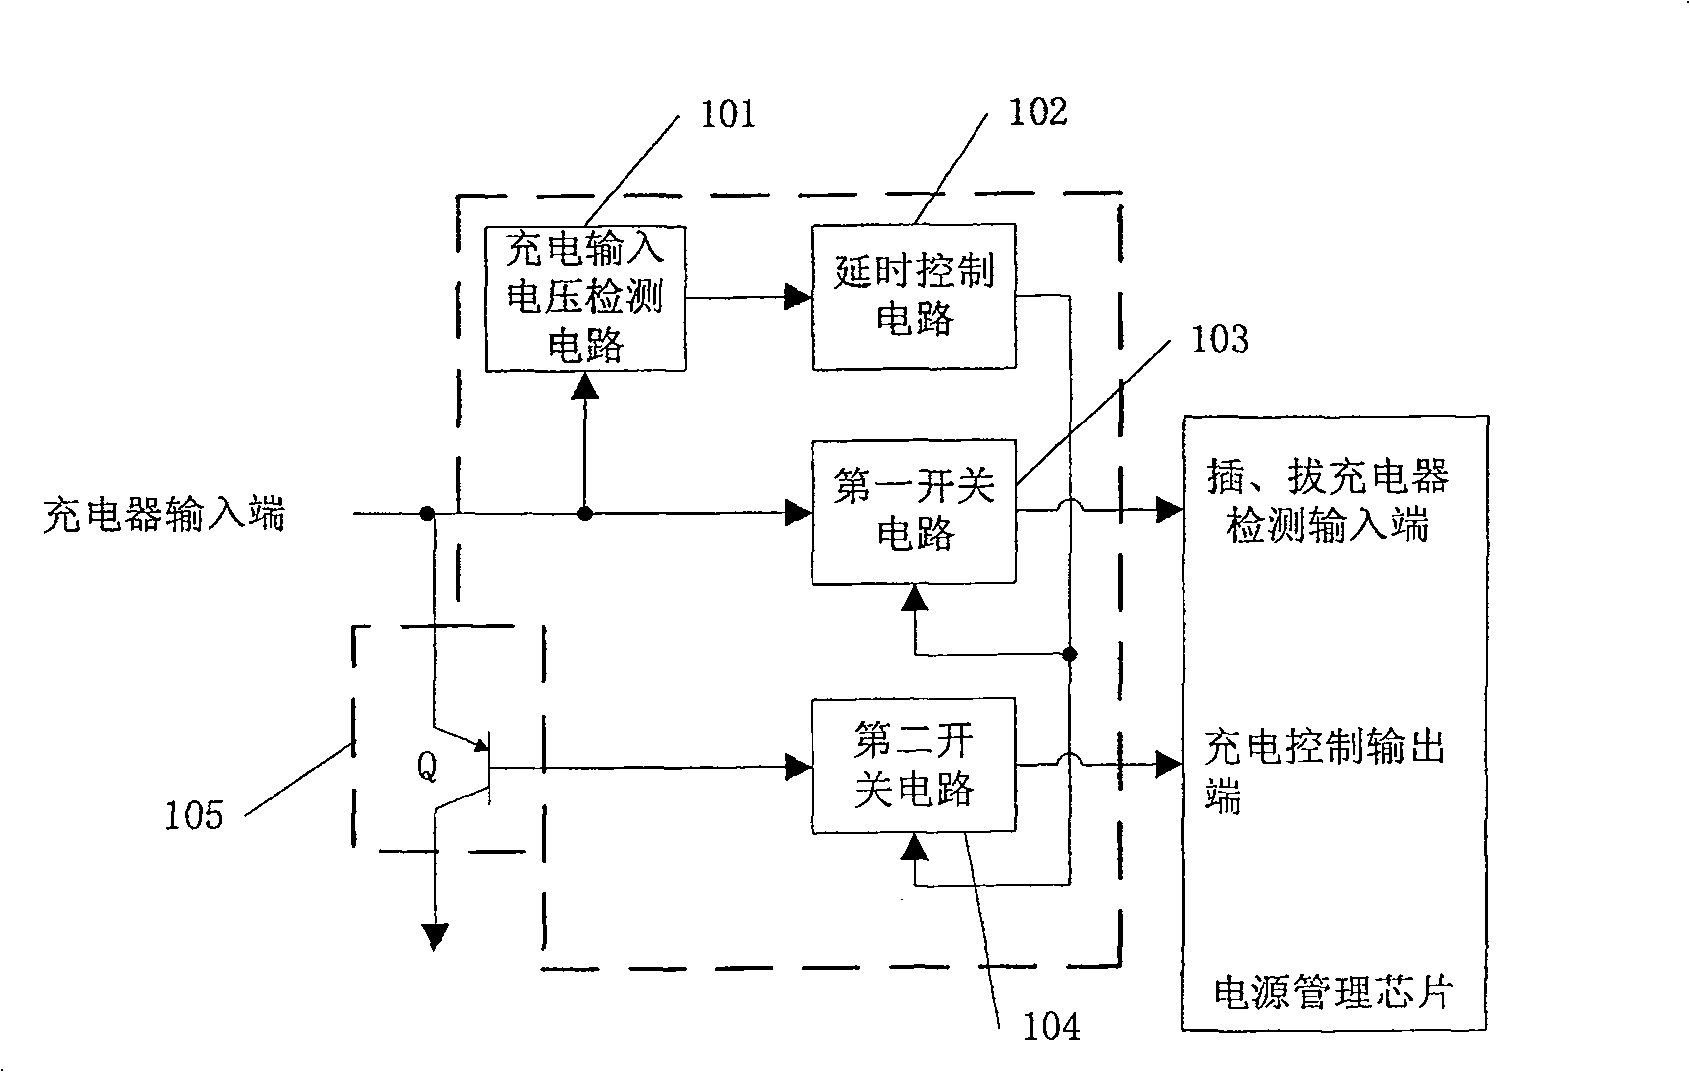 Terminal equipment charging overvoltage protective device and method